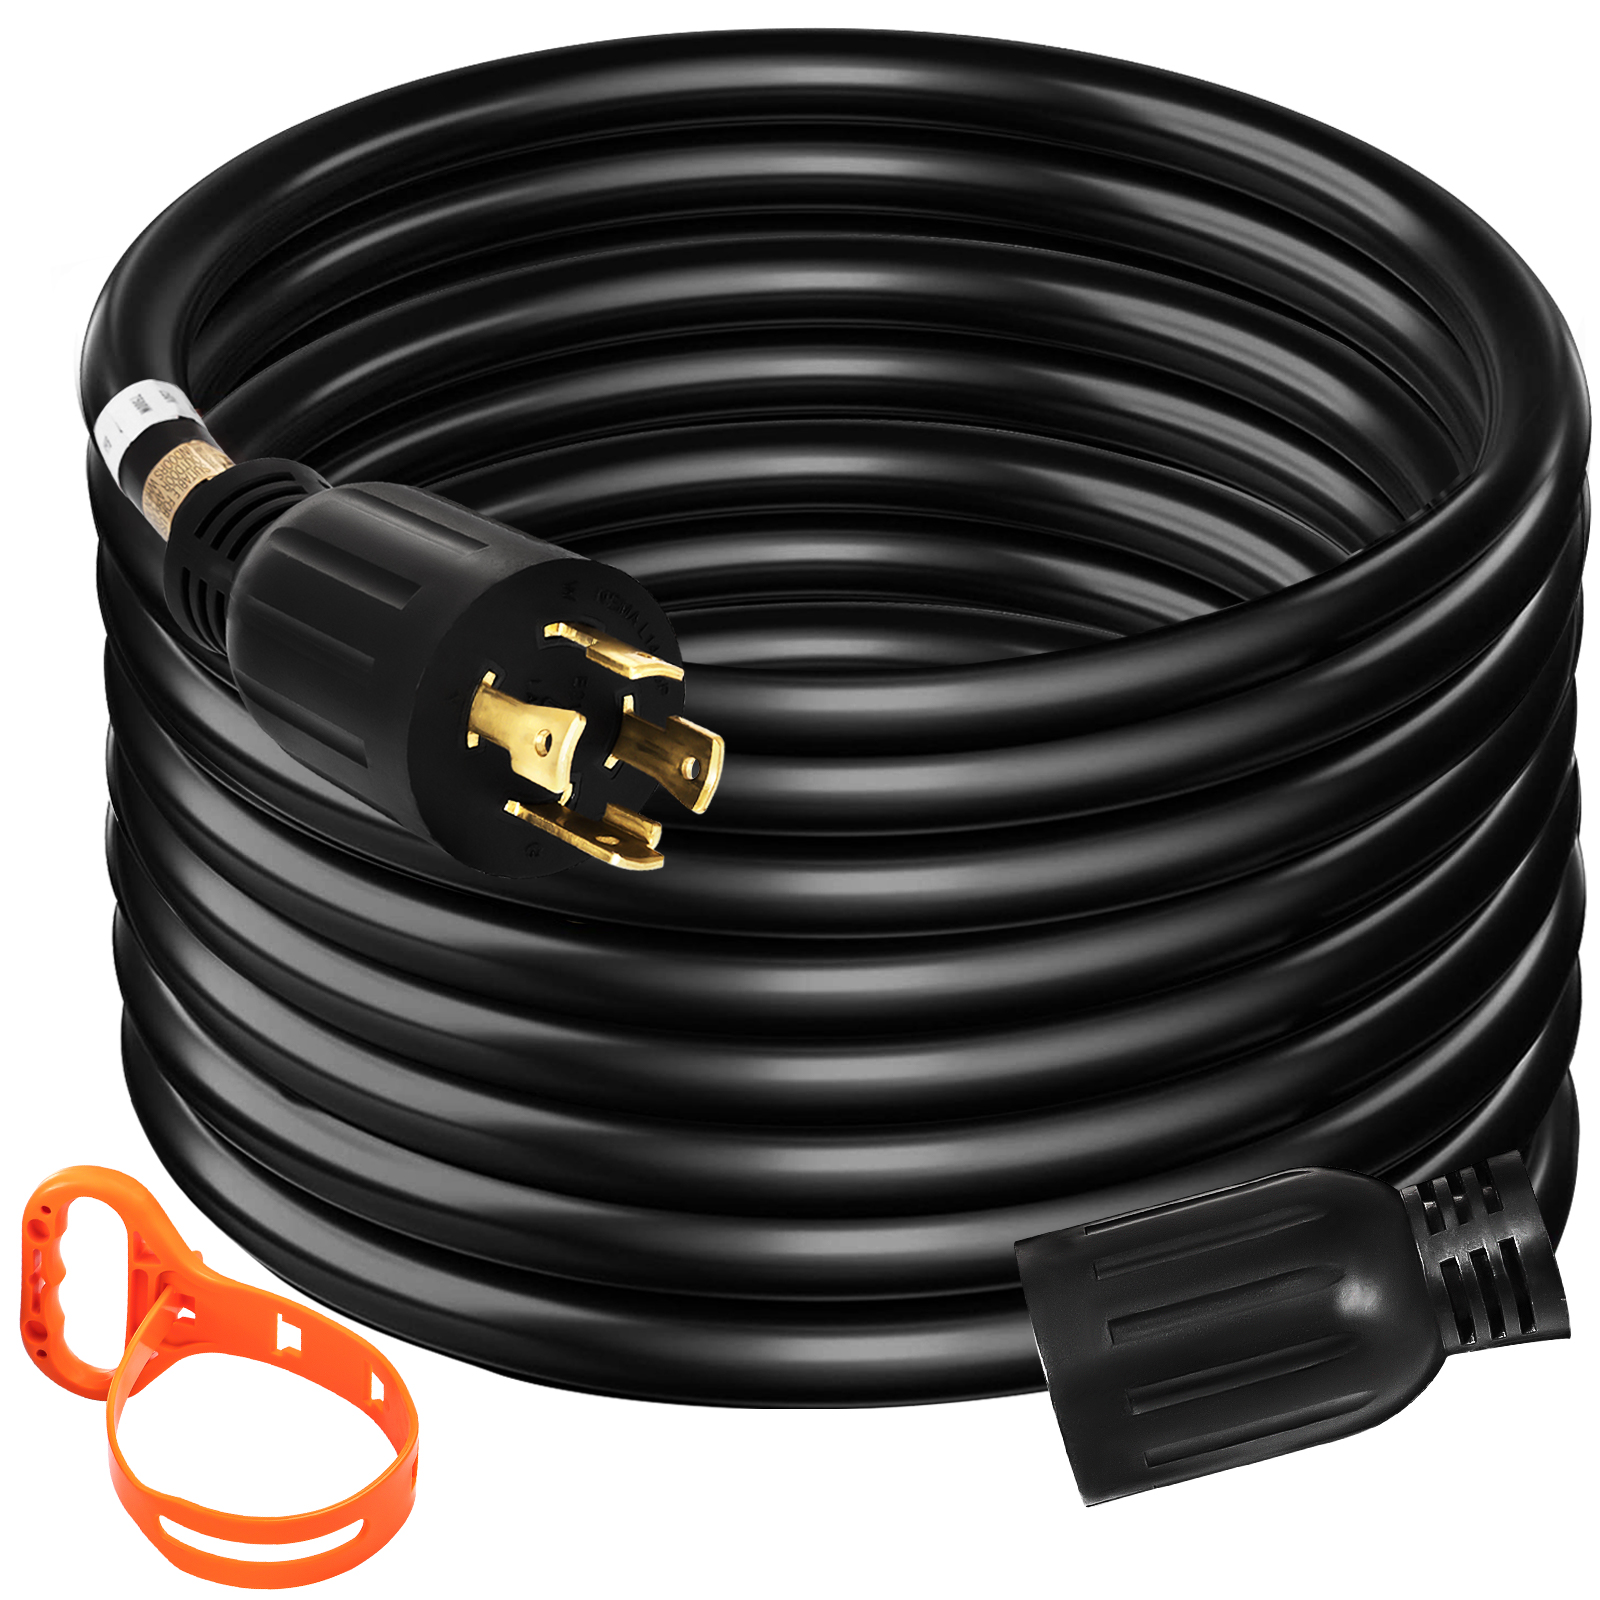 L14-30 Extension Cord 20 ft 4-Prong Outdoor Rated 125/250V 10 AWG 30A 